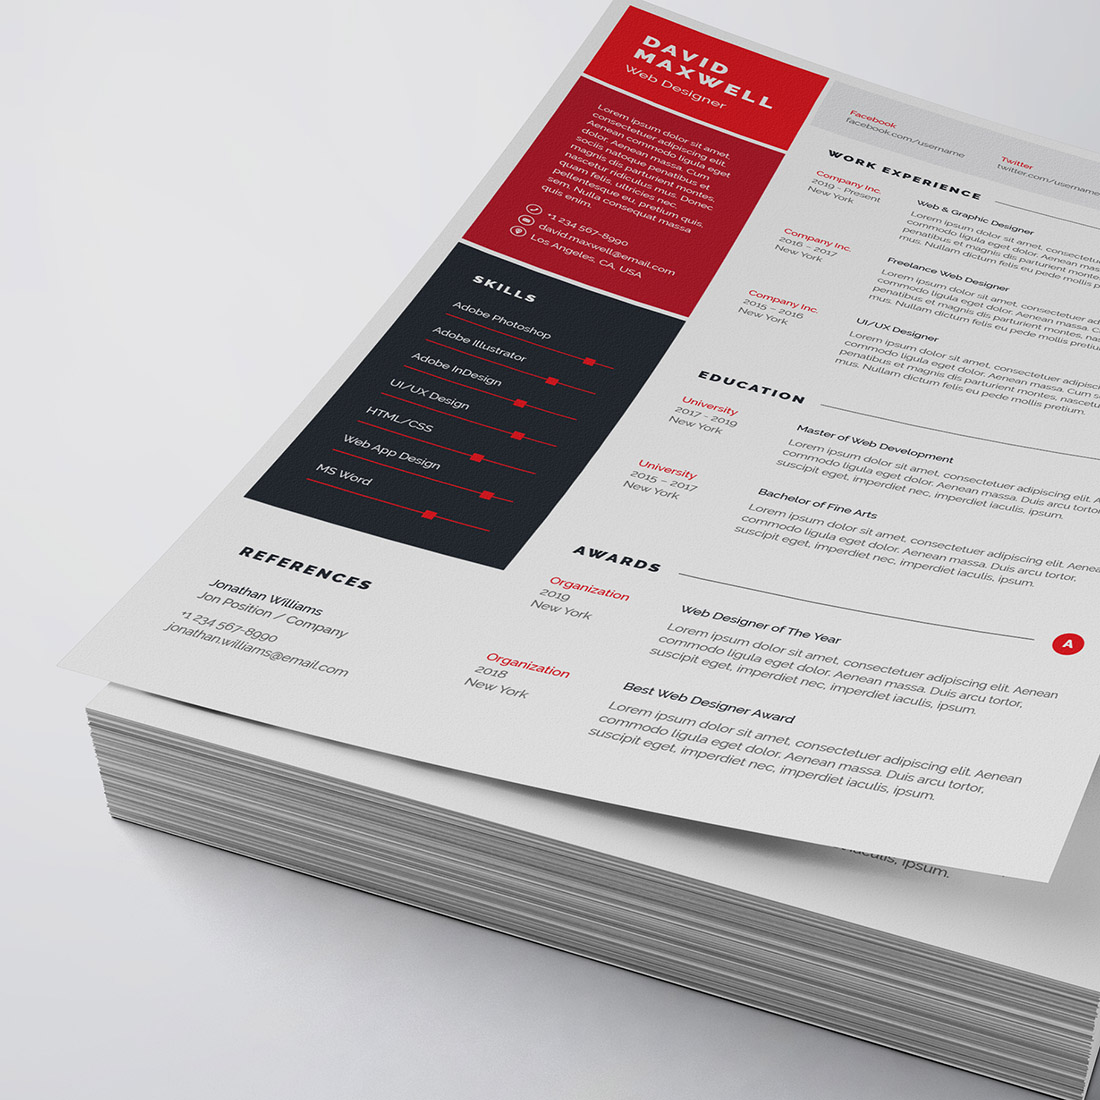 Professional resume template with a red and black color scheme.